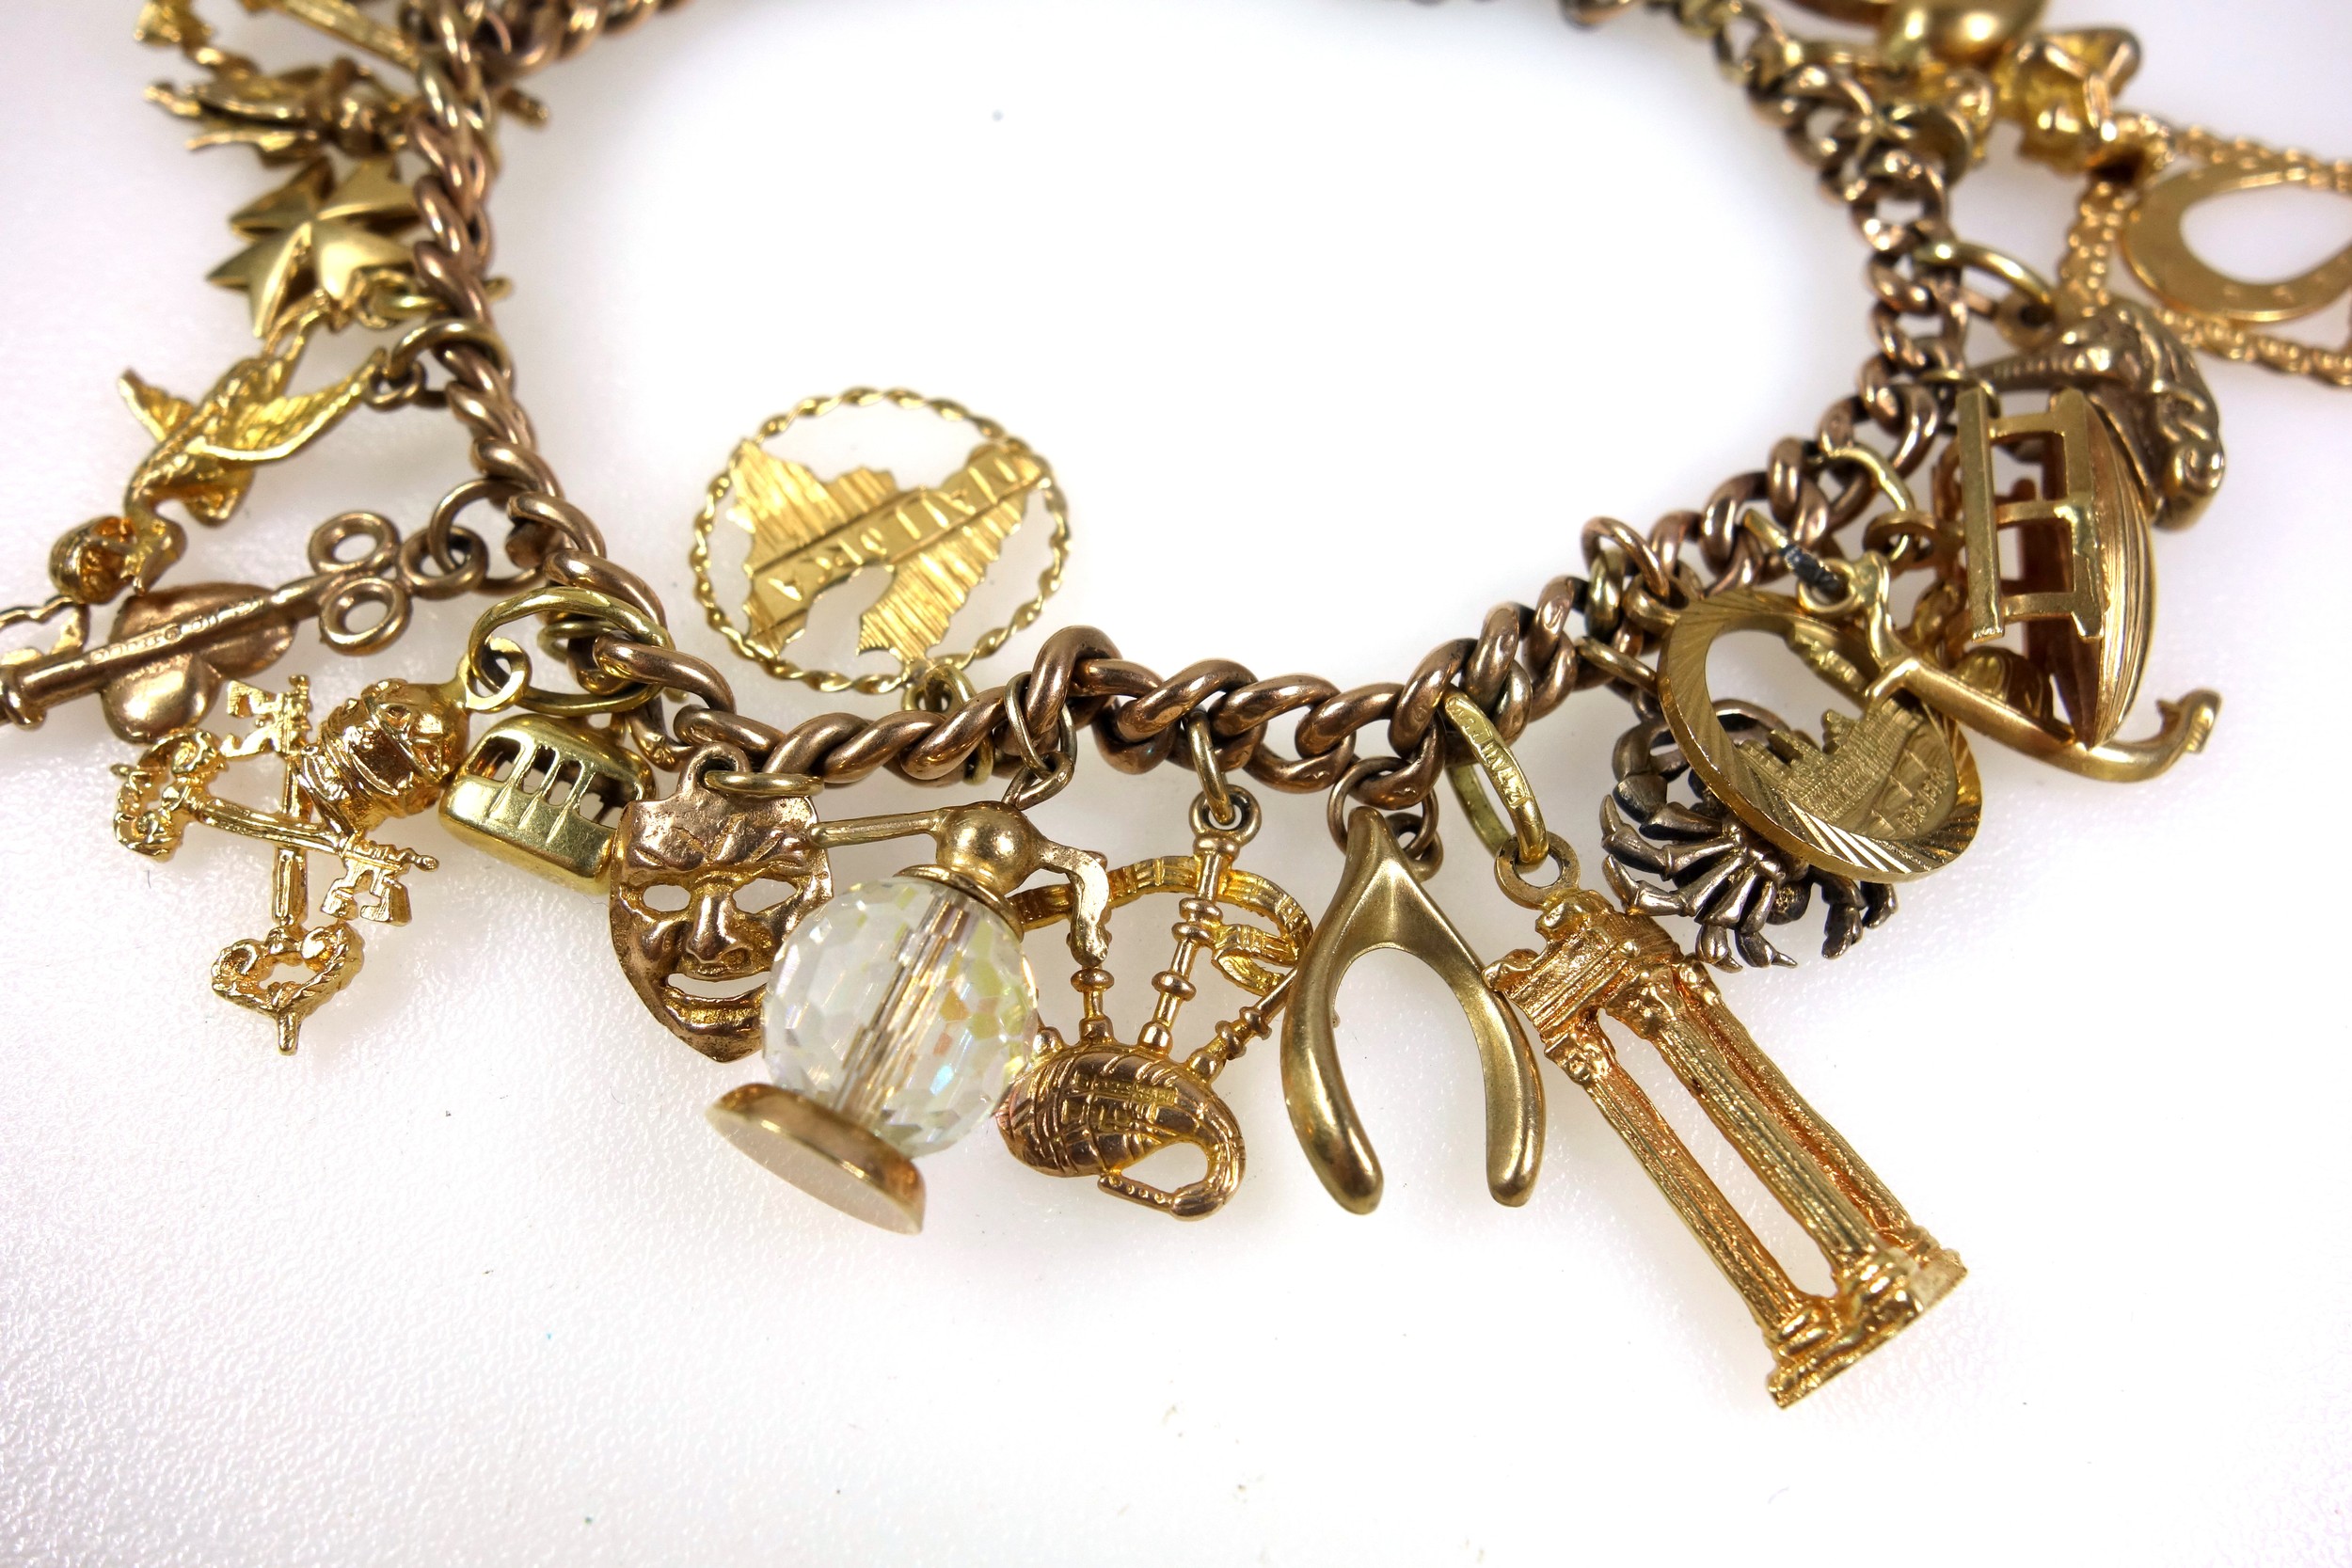 9ct gold charm bracelet with 27 charms, gross weight 44.2 grams - Image 4 of 5